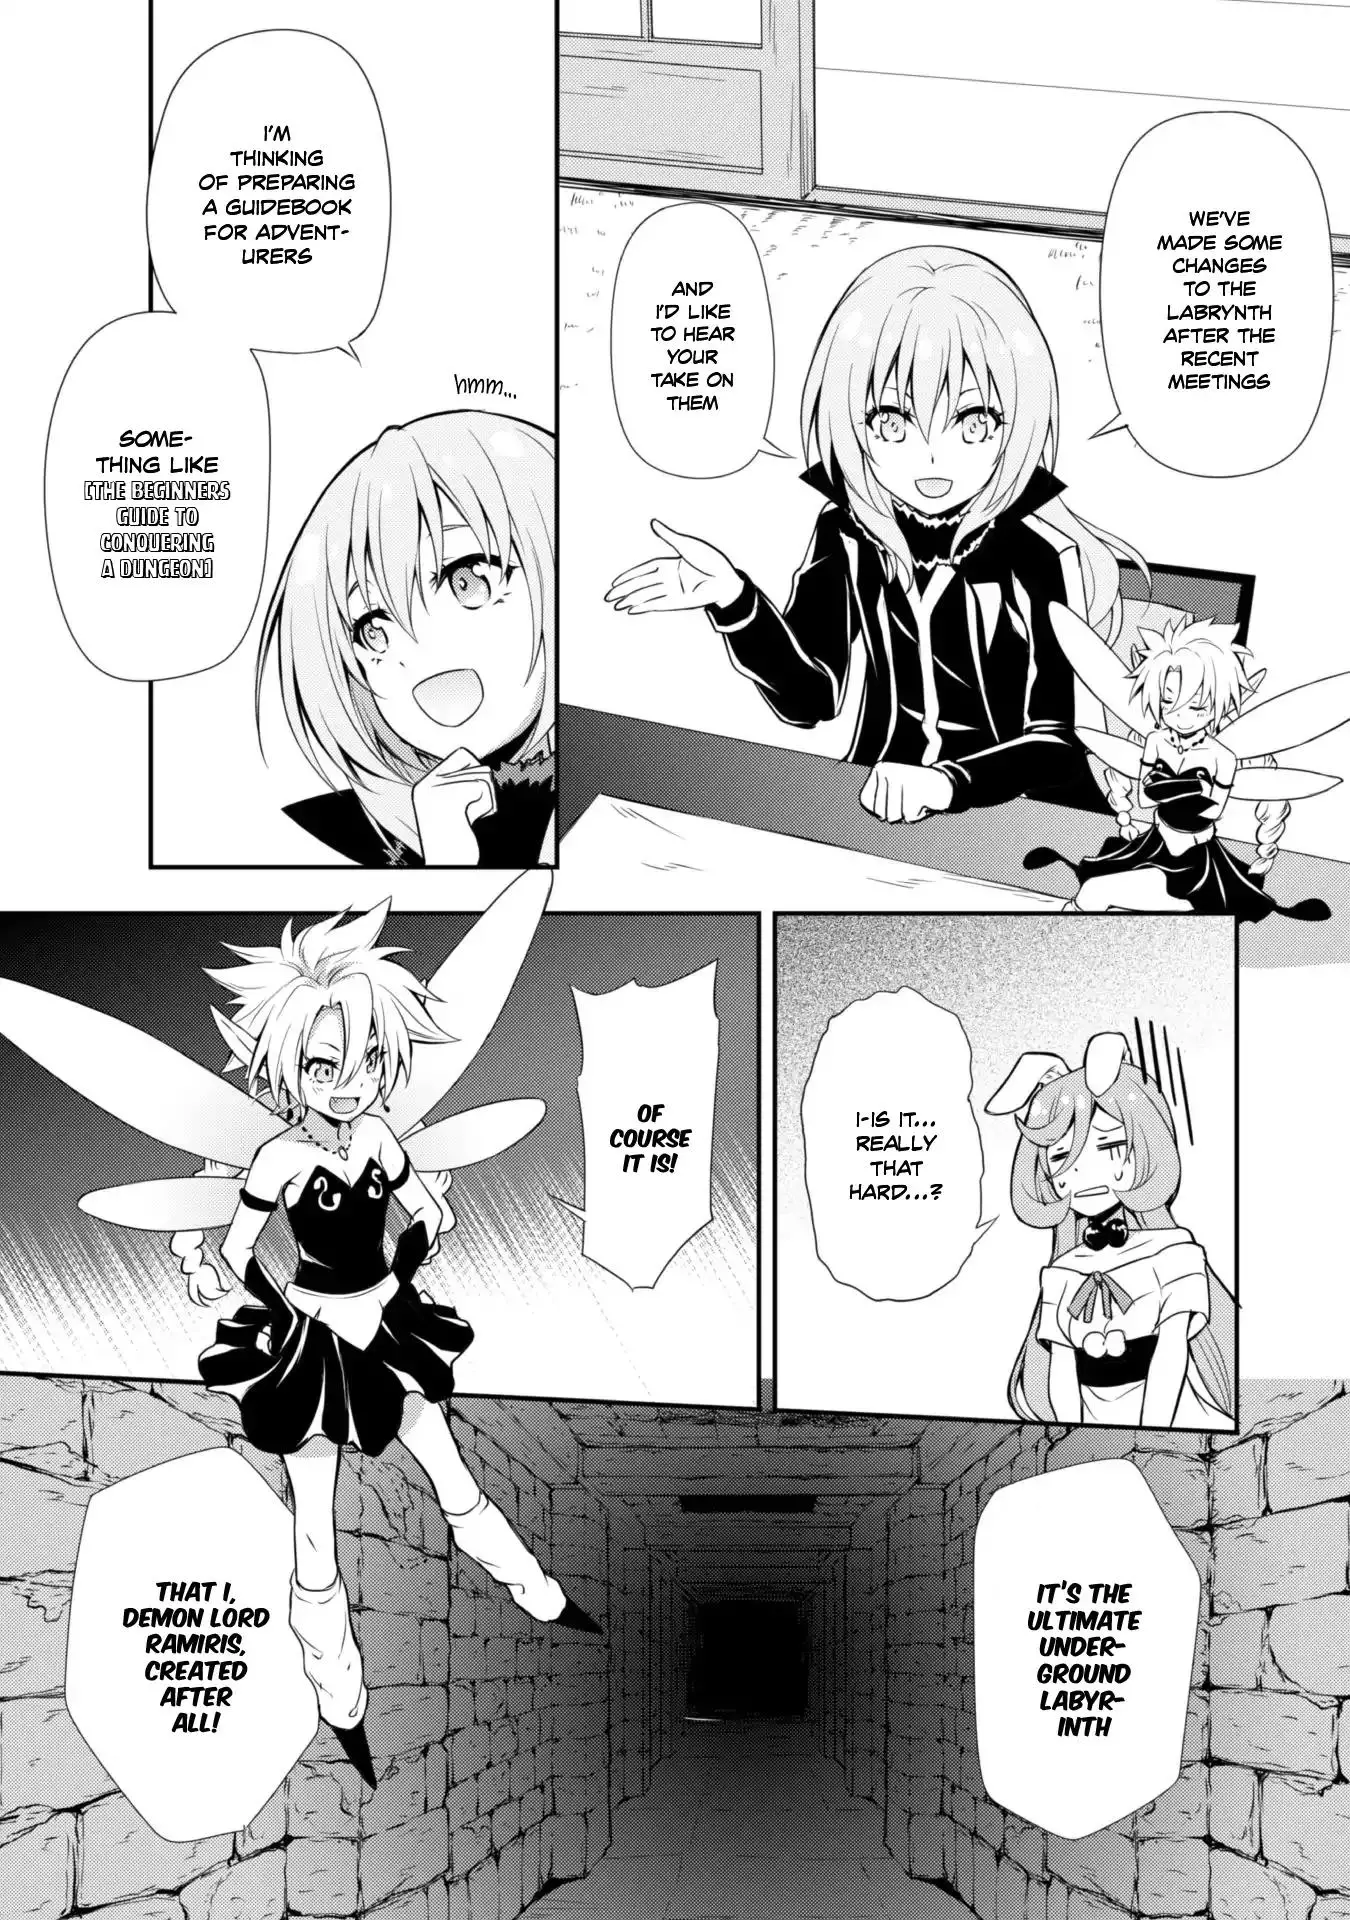 Tensei Shitara Slime Datta Ken: The Ways of Strolling in the Demon Country - 5 page 6